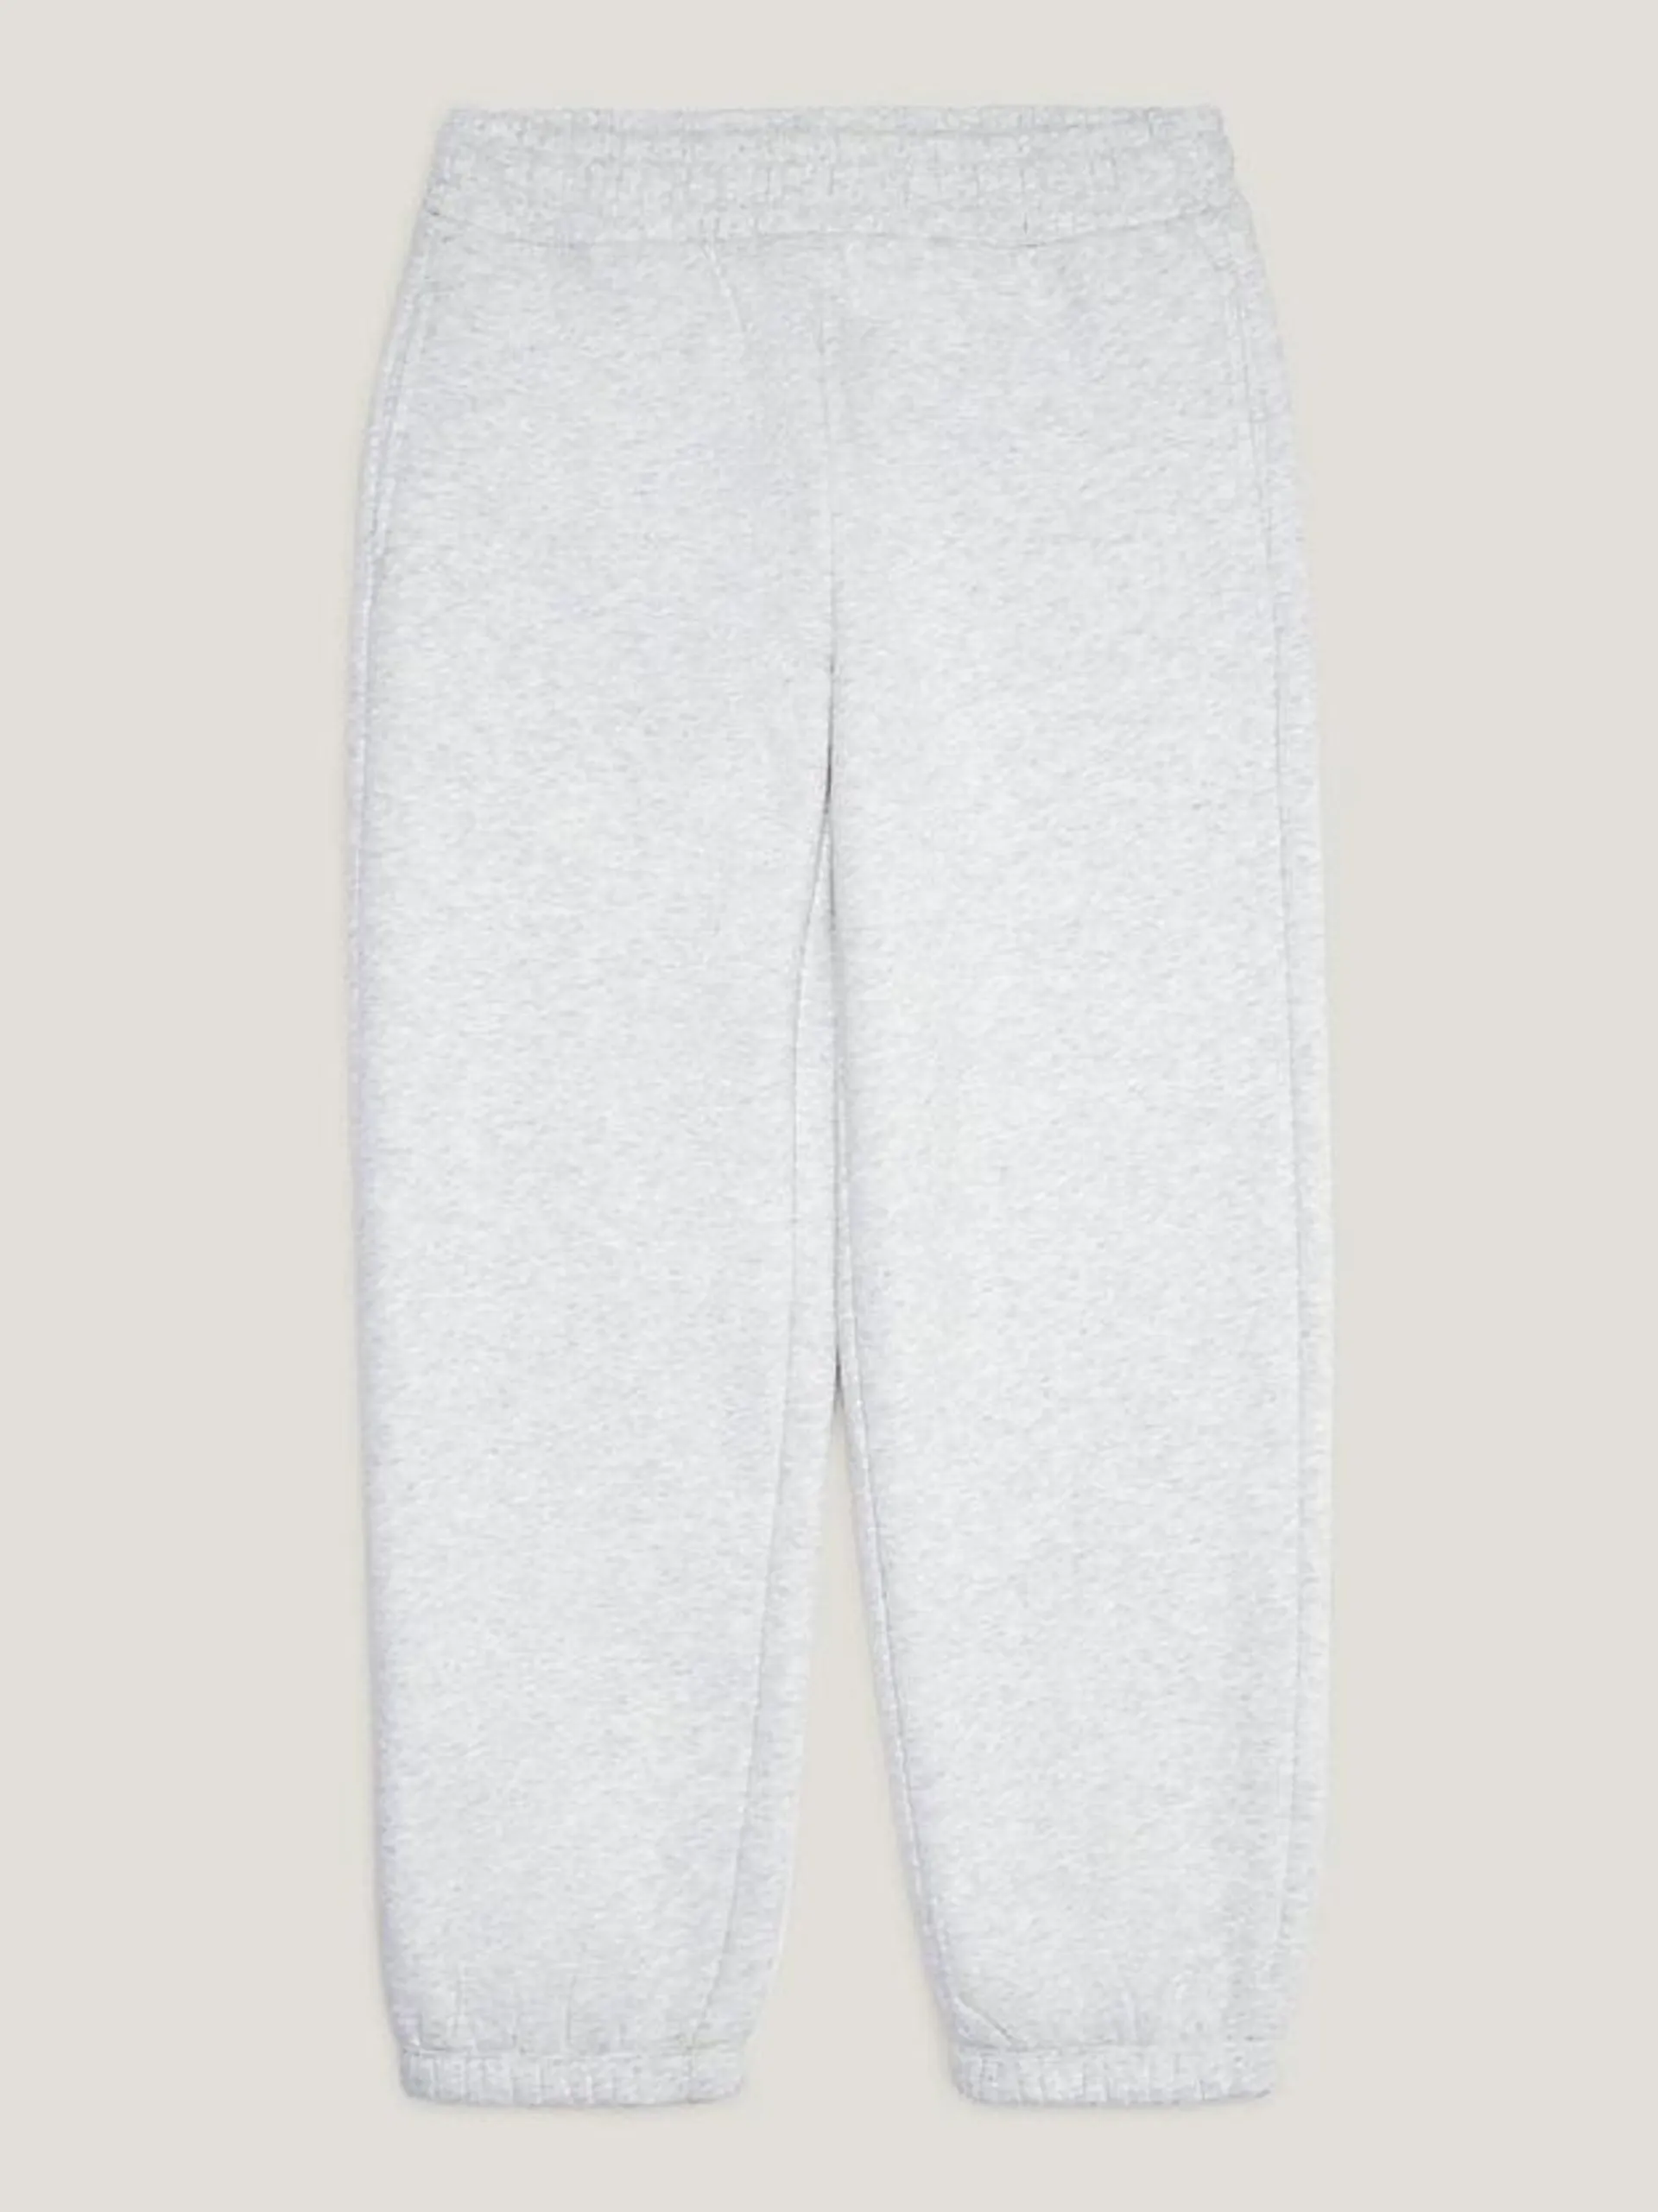 Dual Gender Essential Archive Joggers